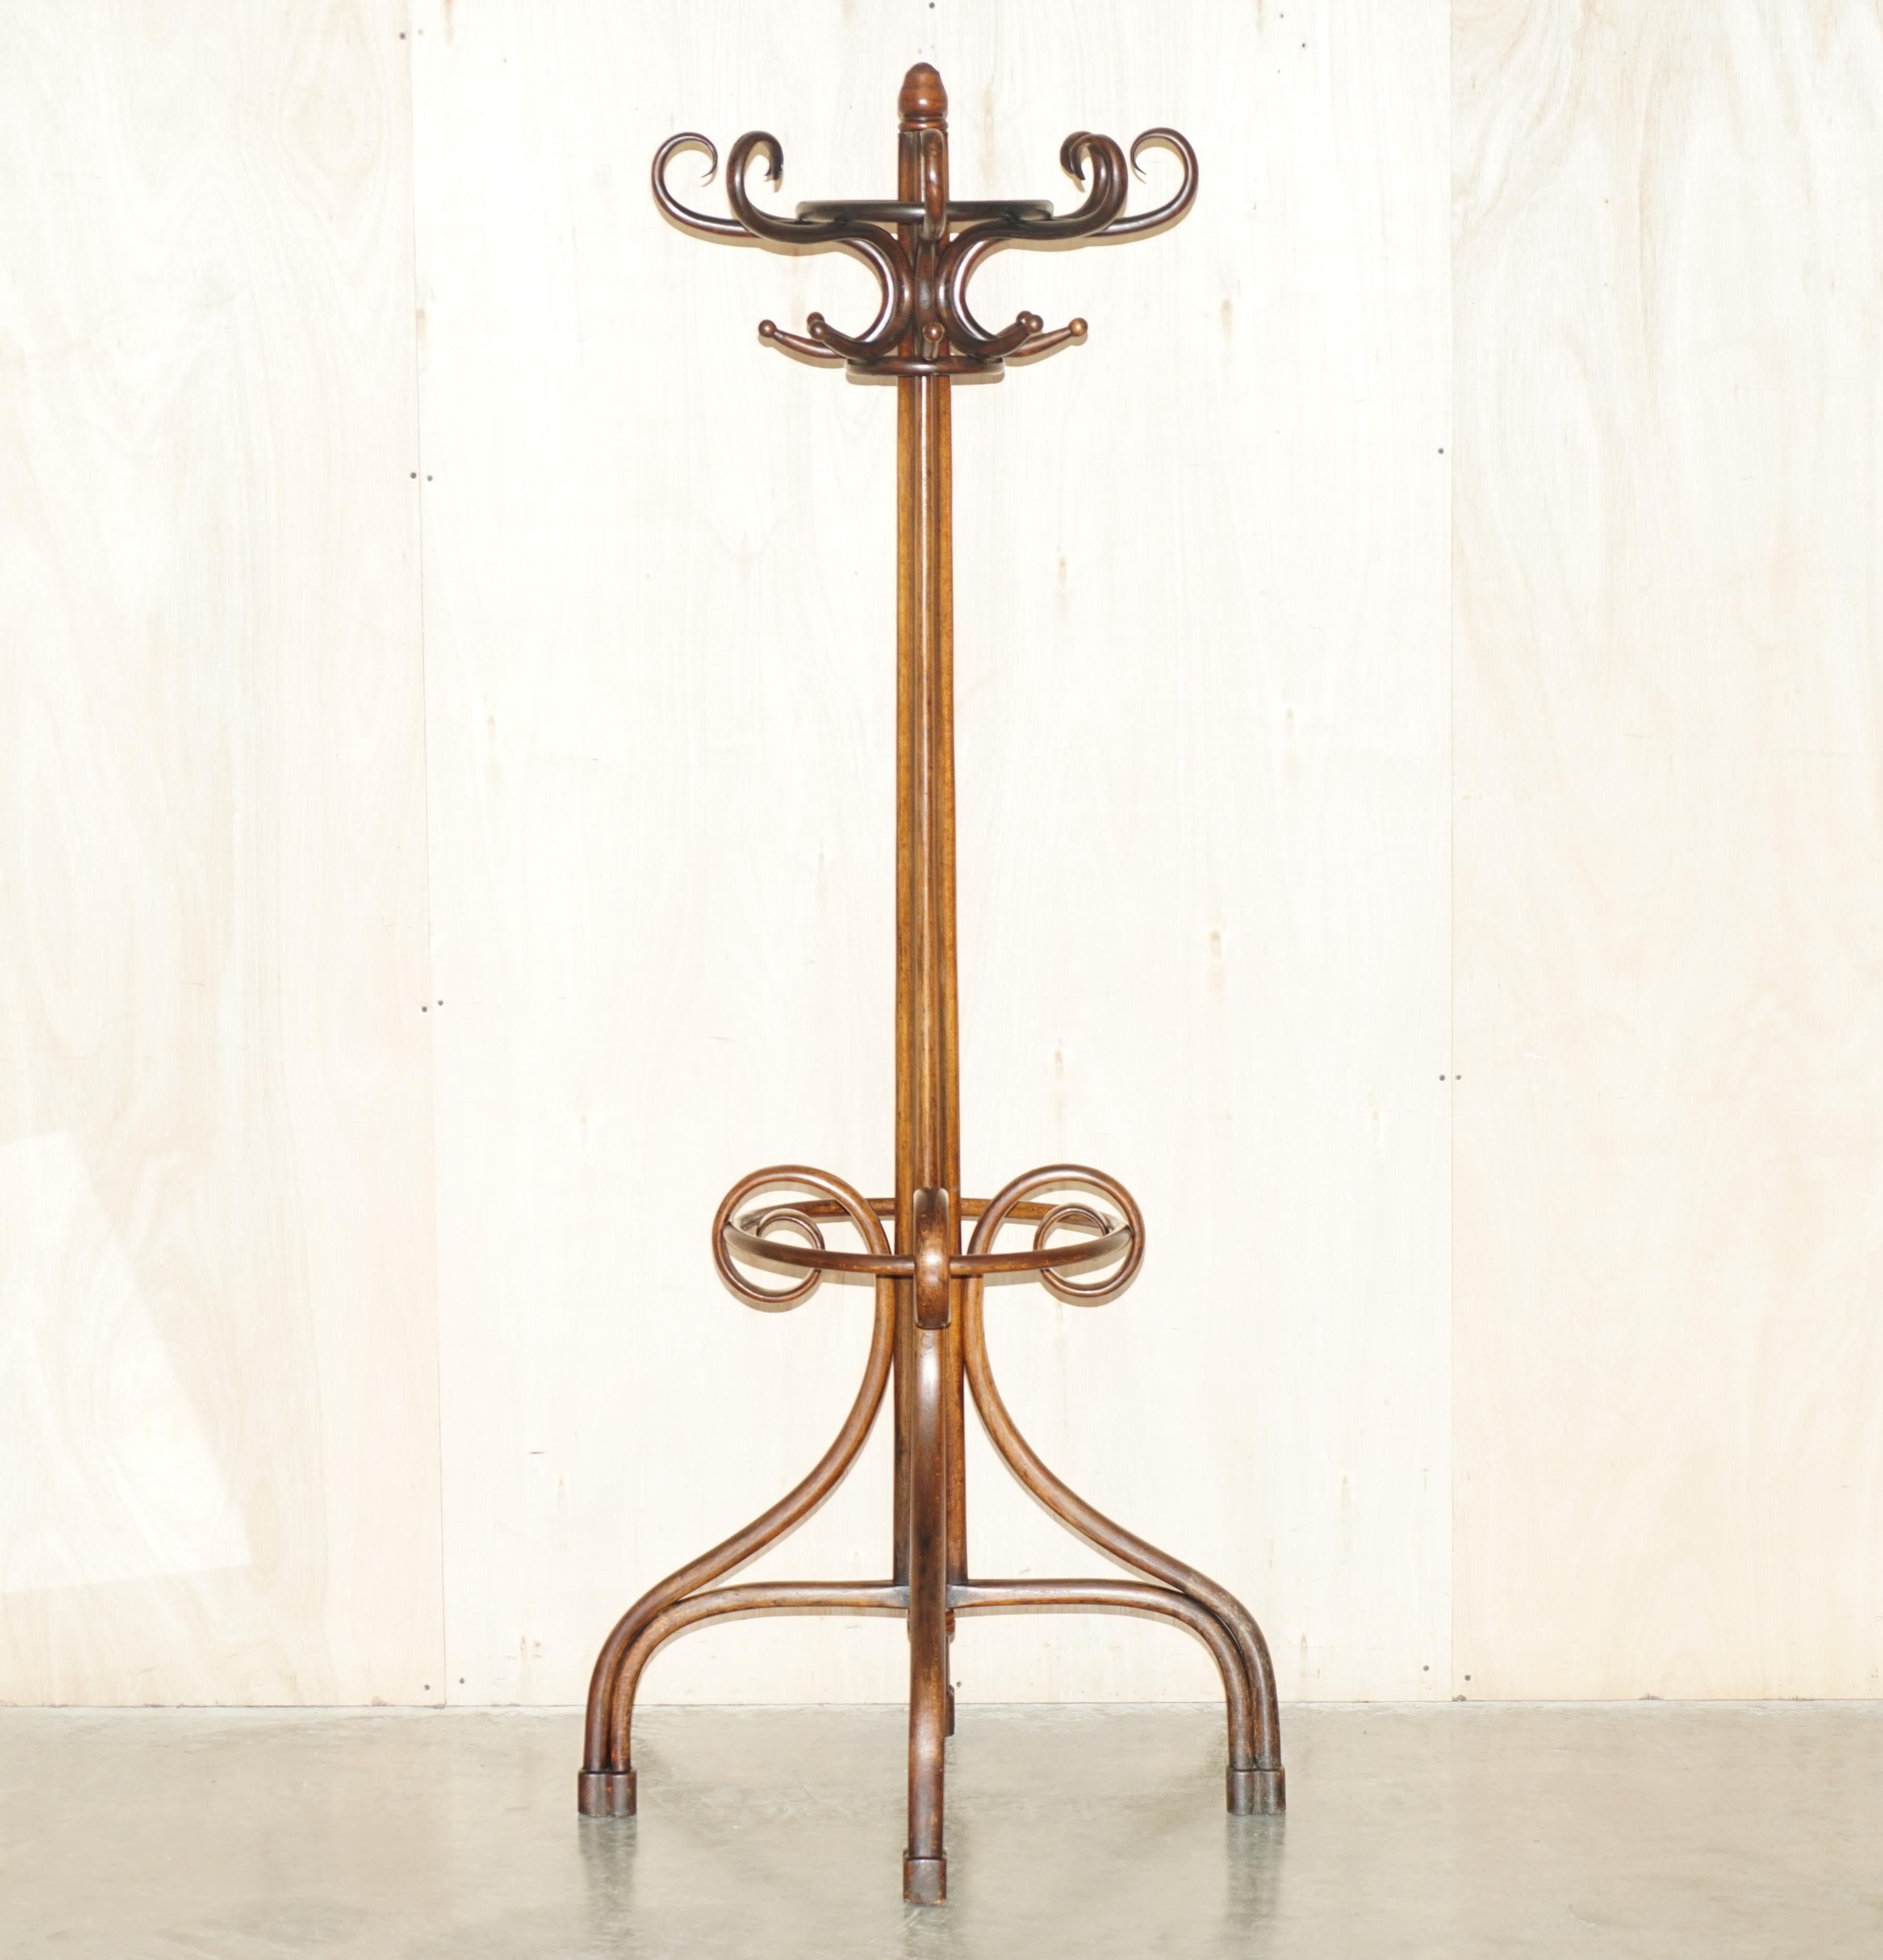 We are delighted to offer for sale this Antique original, circa 1880, extra large, Thonet Bentwood solid Beech wood eight prong coat stand / rack.

This is in my opinion the finest hat, coat and umbrella rack I have ever seen, you would have come